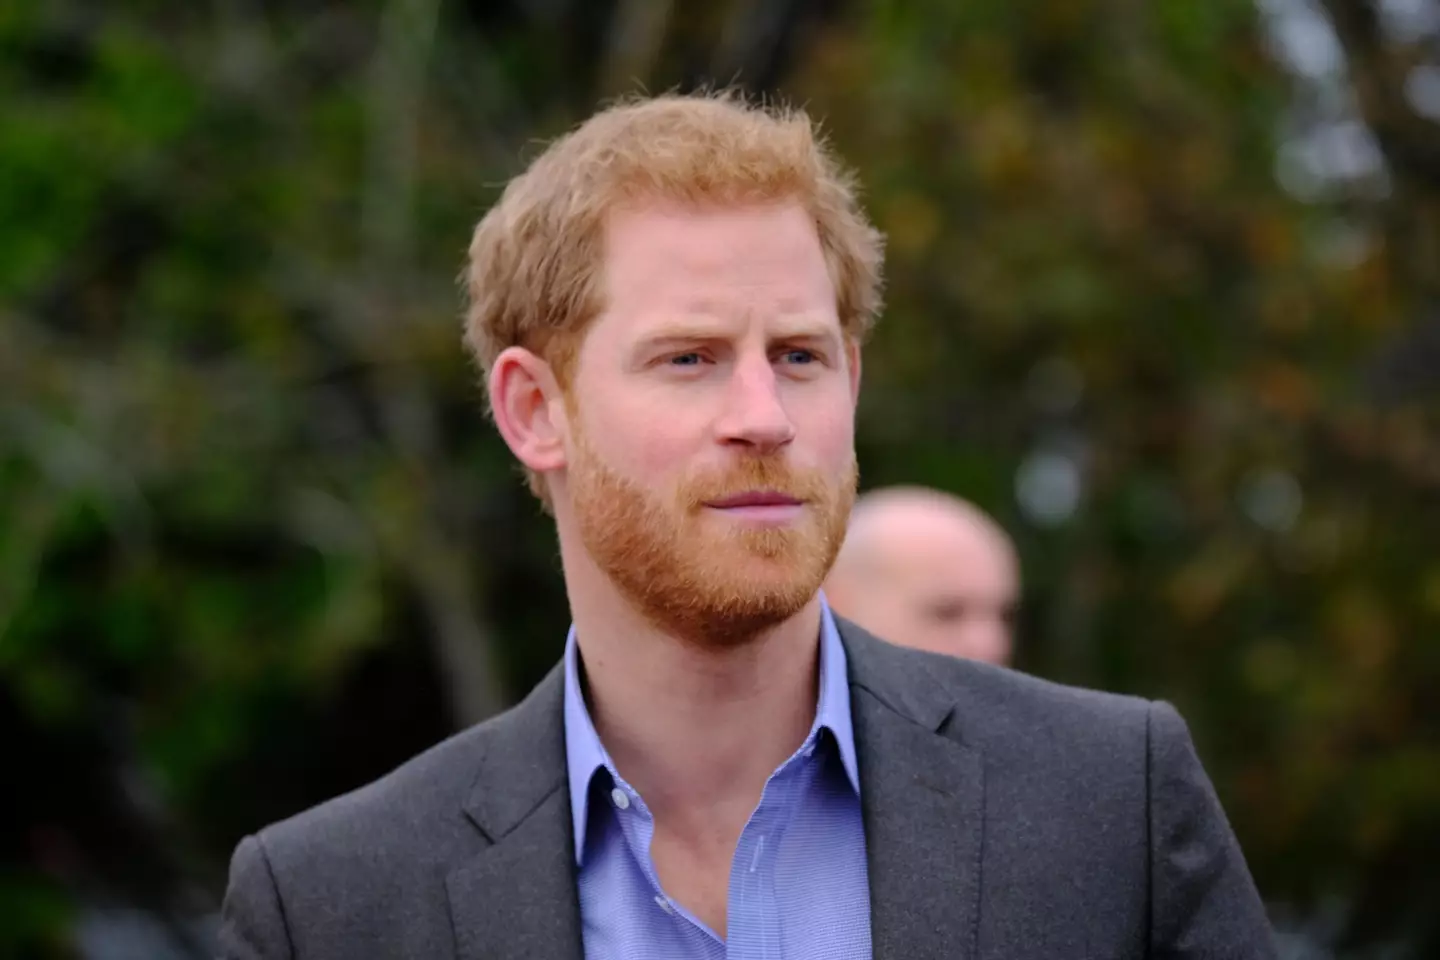 Prince Harry has also spoken about cocaine in his new memoir.